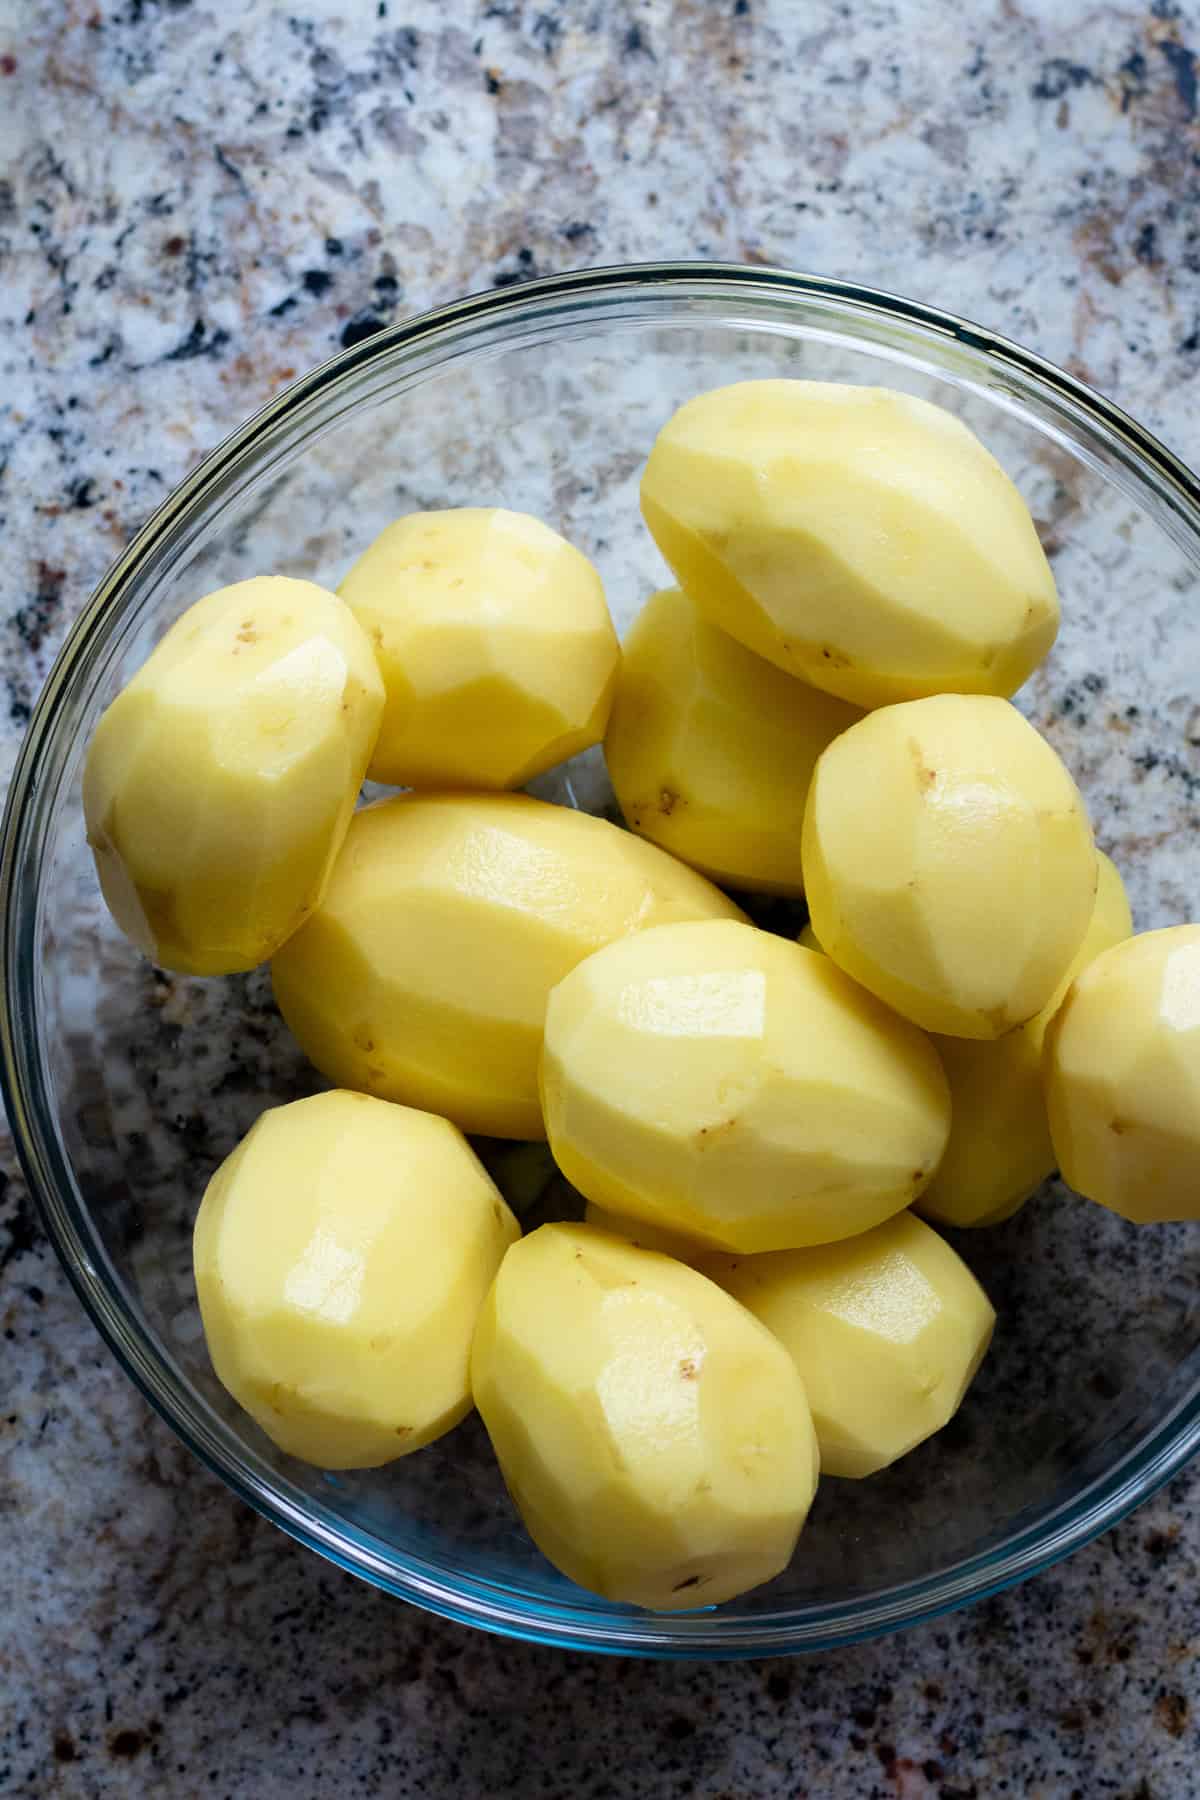 Peeled gold potatoes in a glass bowl.